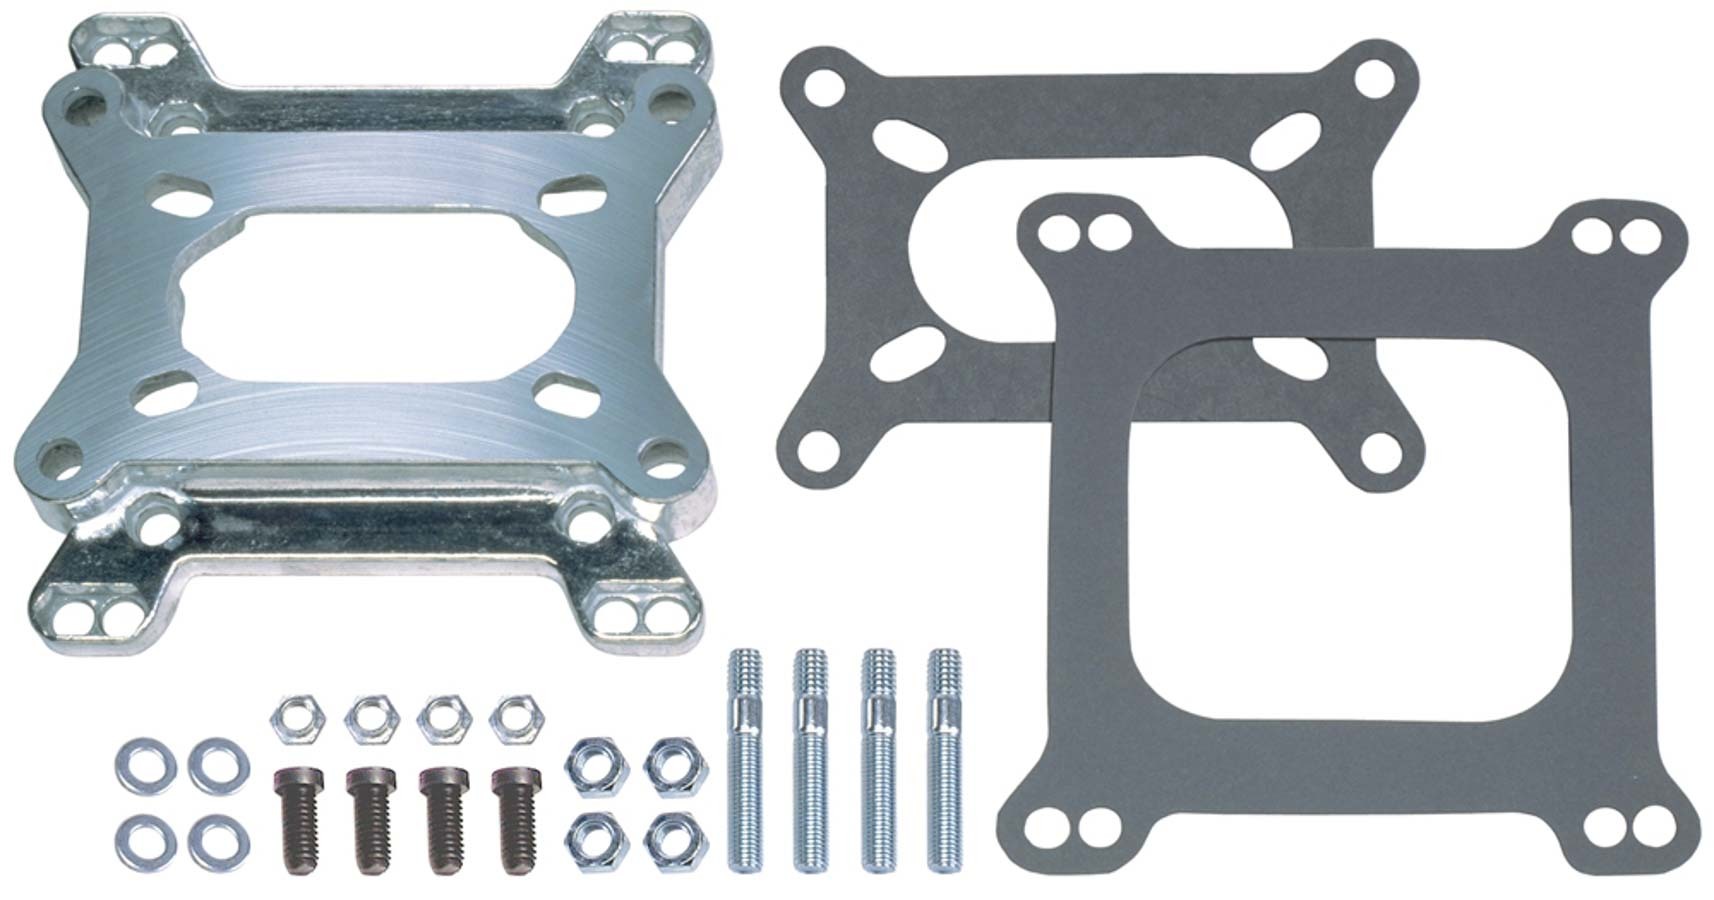 Trans Dapt 2065 Carburetor Adapter, 15/16 in Thick, Open, 2-Barrel to Square Bore, Gasket / Hardware, Aluminum, Natural, Each